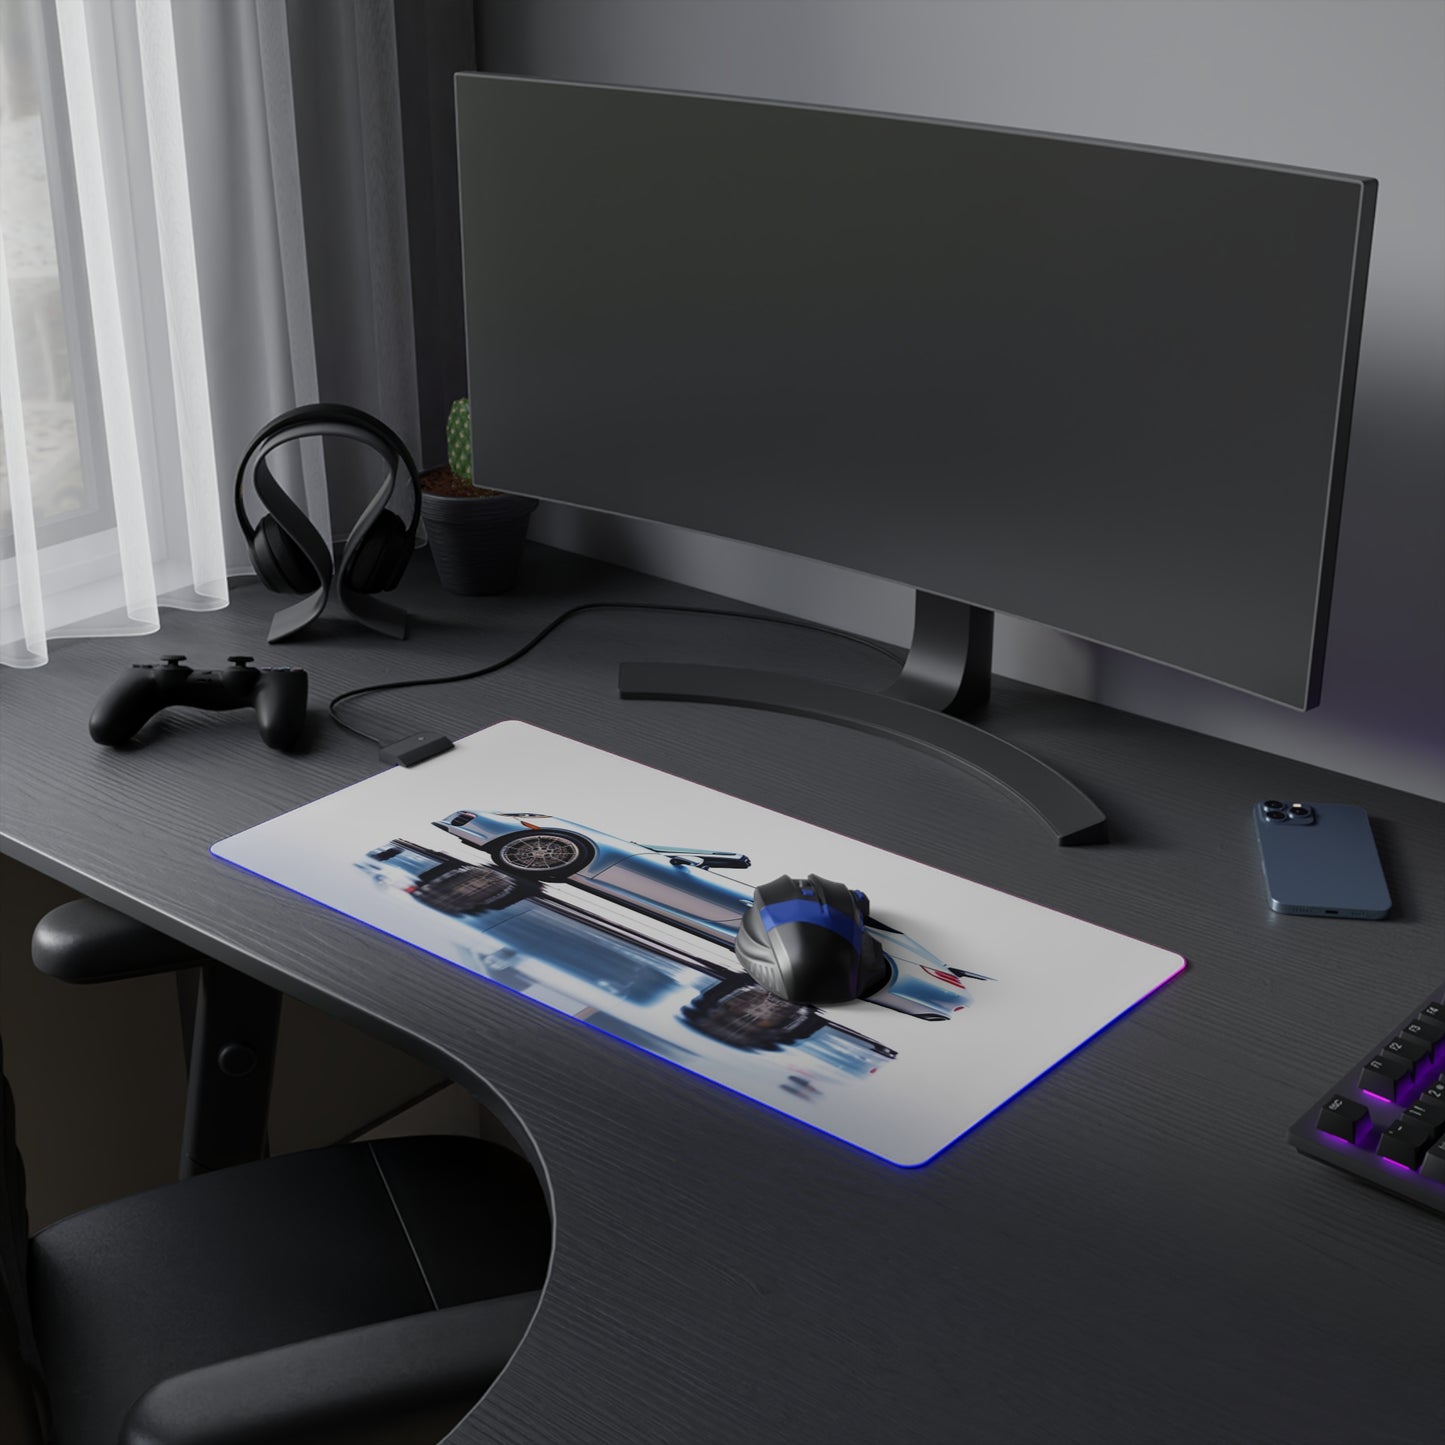 LED Gaming Mouse Pad 911 Speedster on water 1